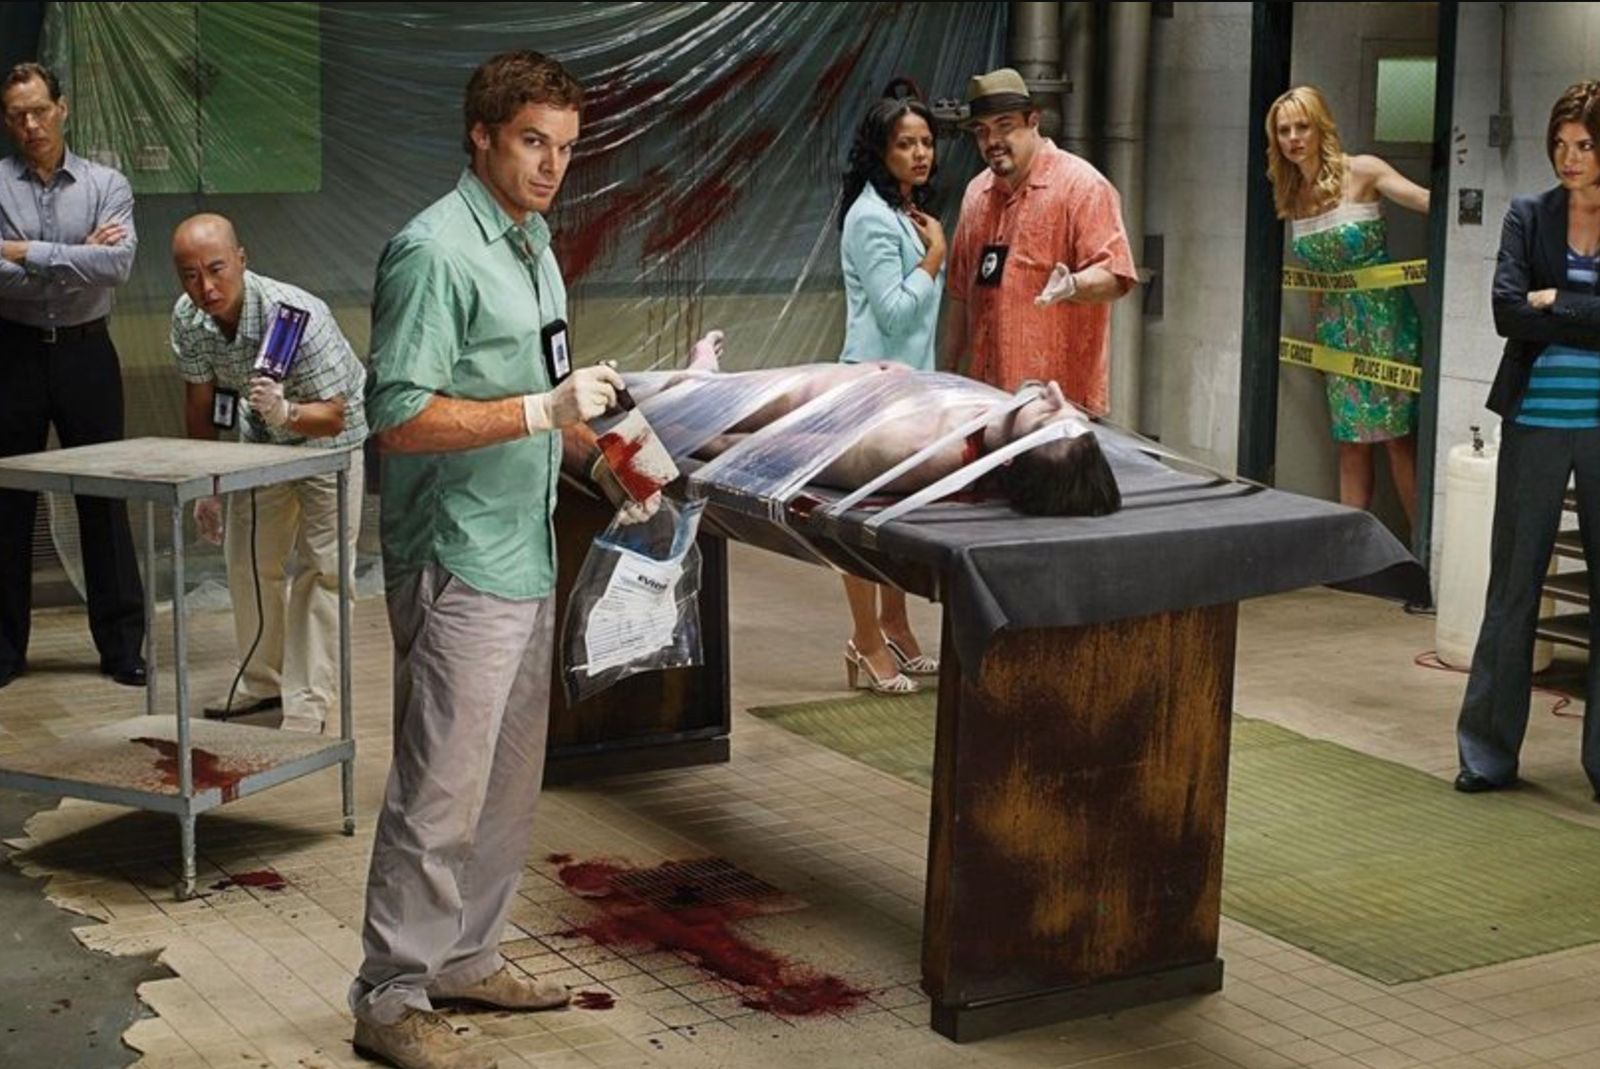 How to Watch Dexter: New Blood Online from Anywhere